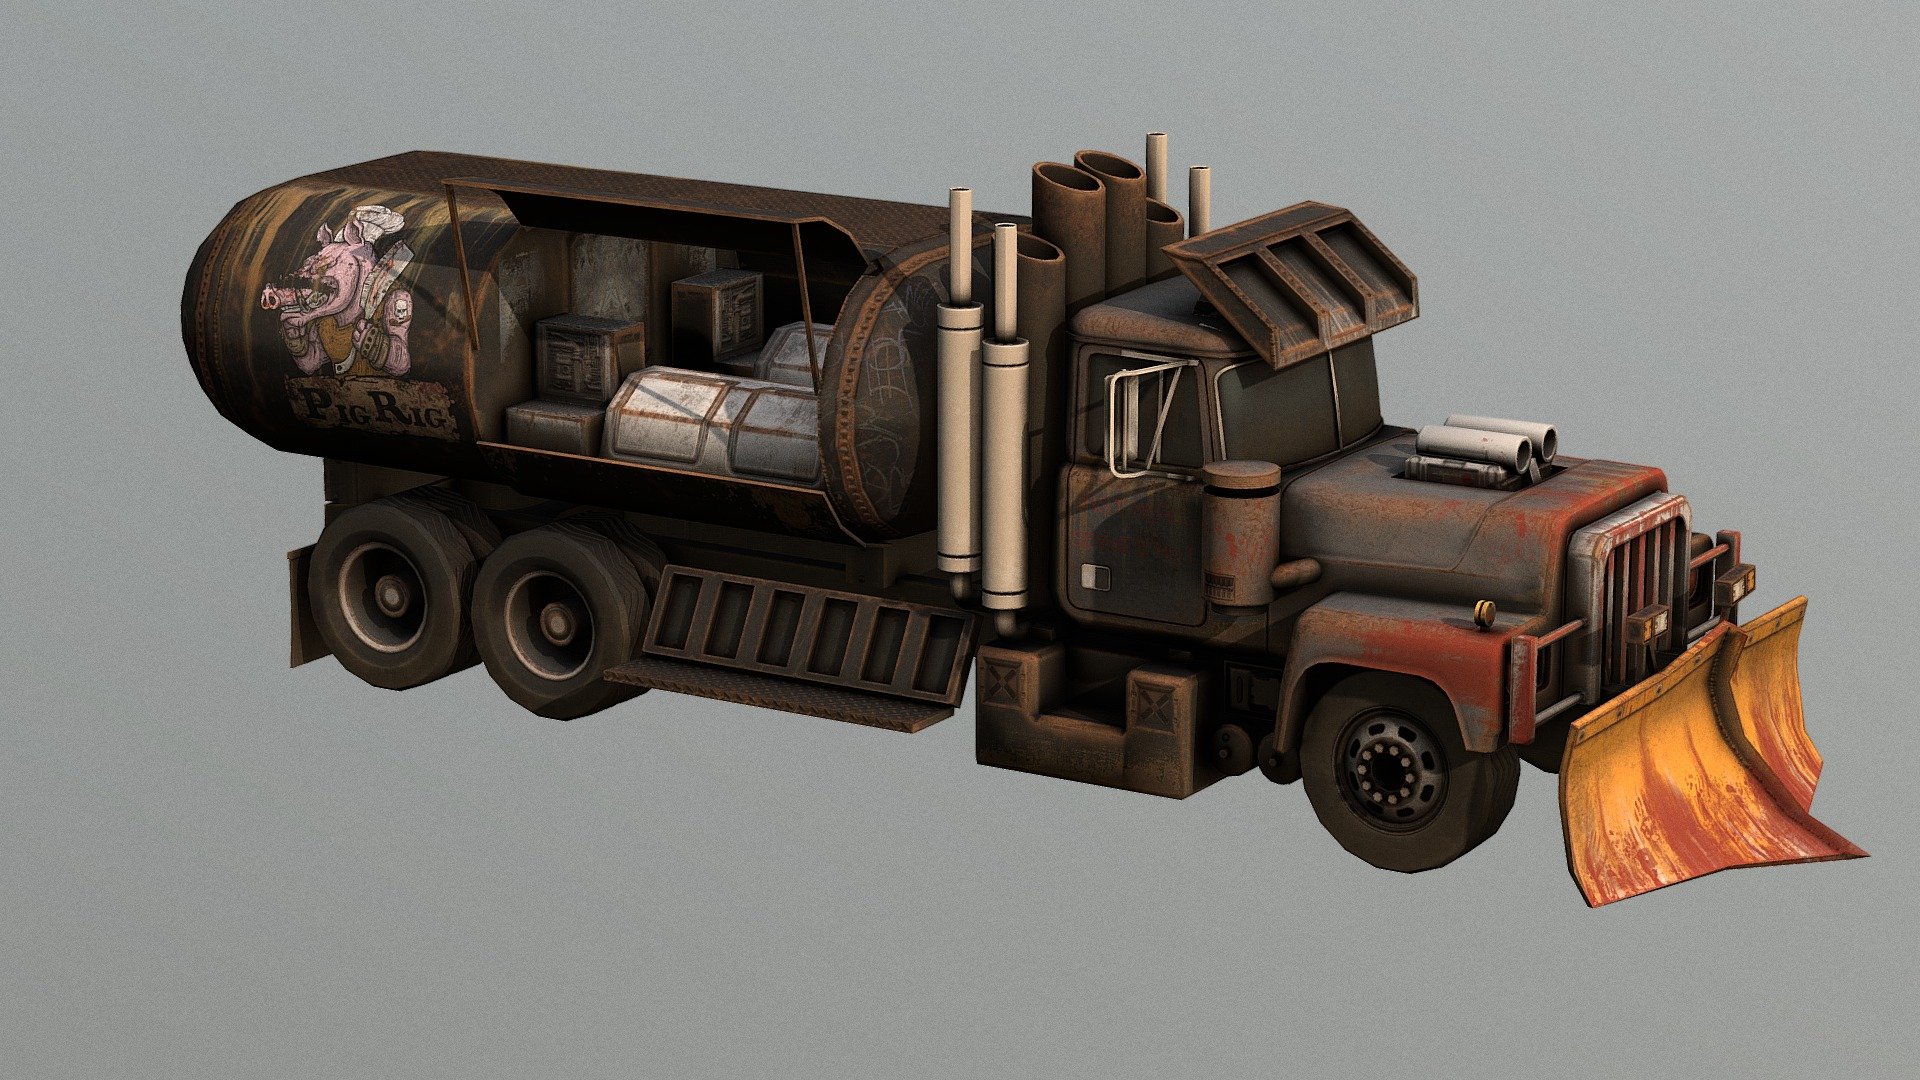 "The Pig Rig" Post Apocalyptic Food Truck!